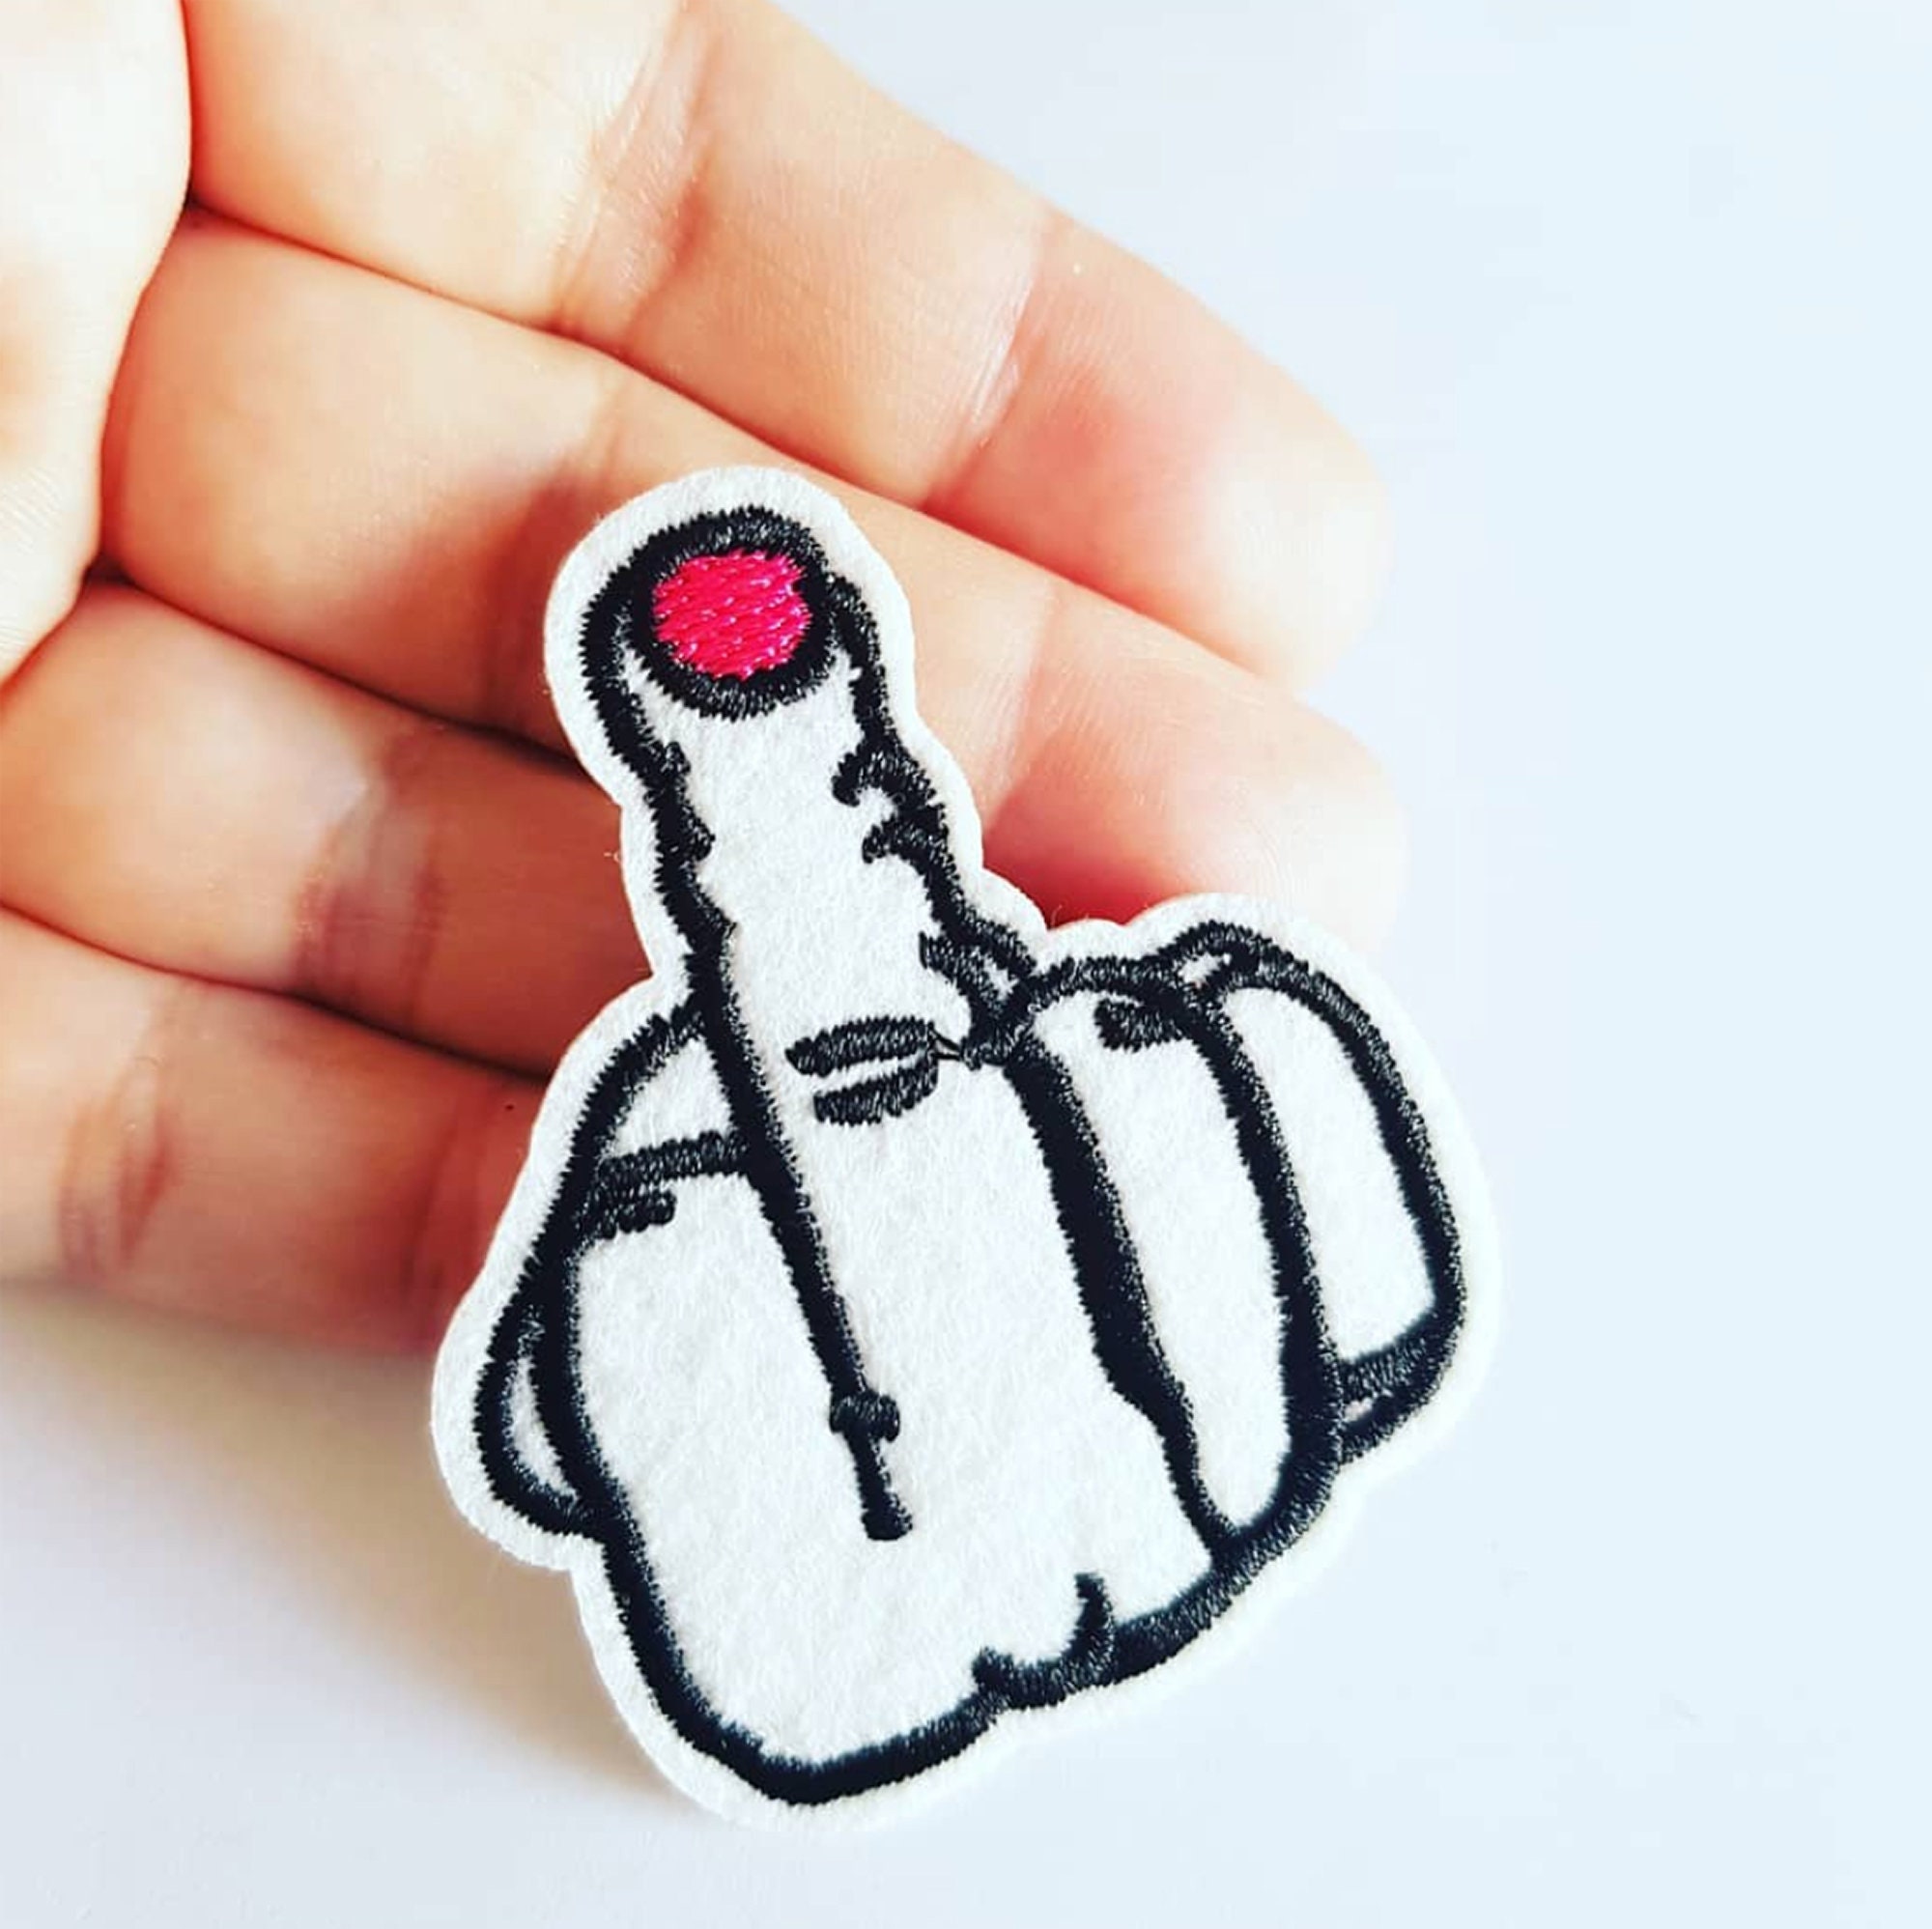 Fck the Haters W/middle Finger Patch Embroidered DIY Iron-on/sew-on  Applique for Jeans Clothing Vest Jacket, Funny Sayings, Humor Sarcastic 